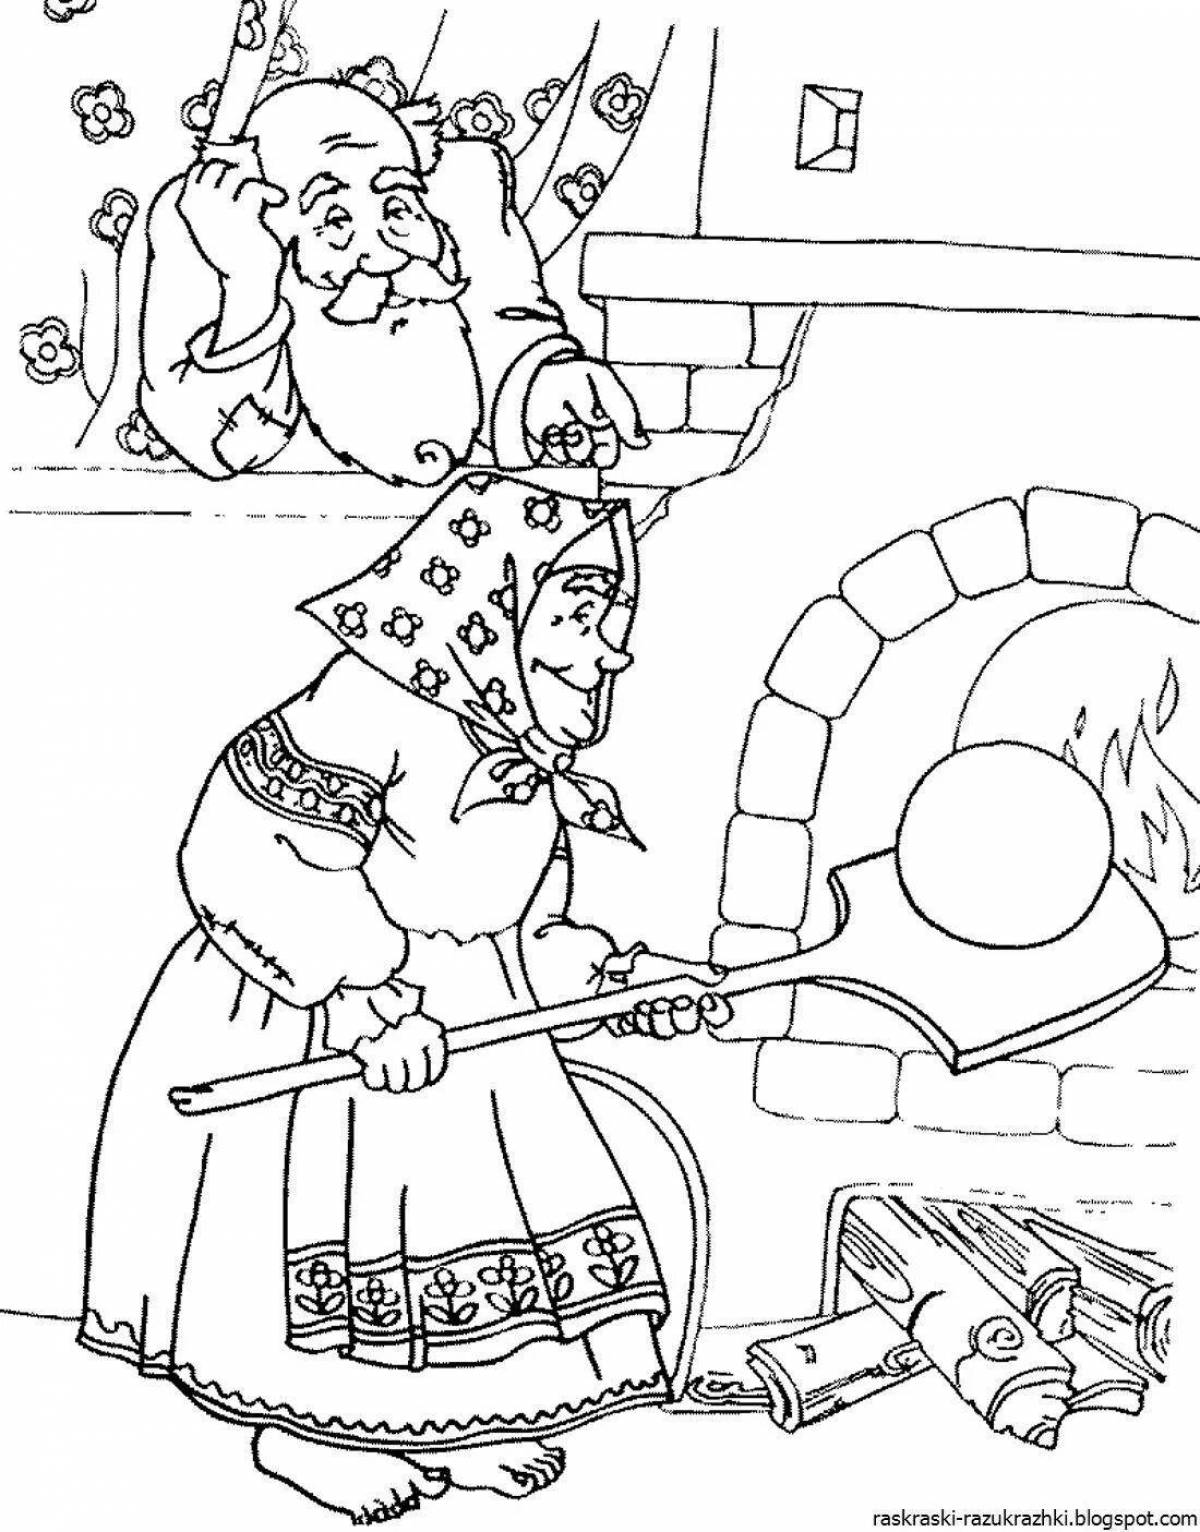 Amazing coloring pages based on fairy tales for children Russian folk